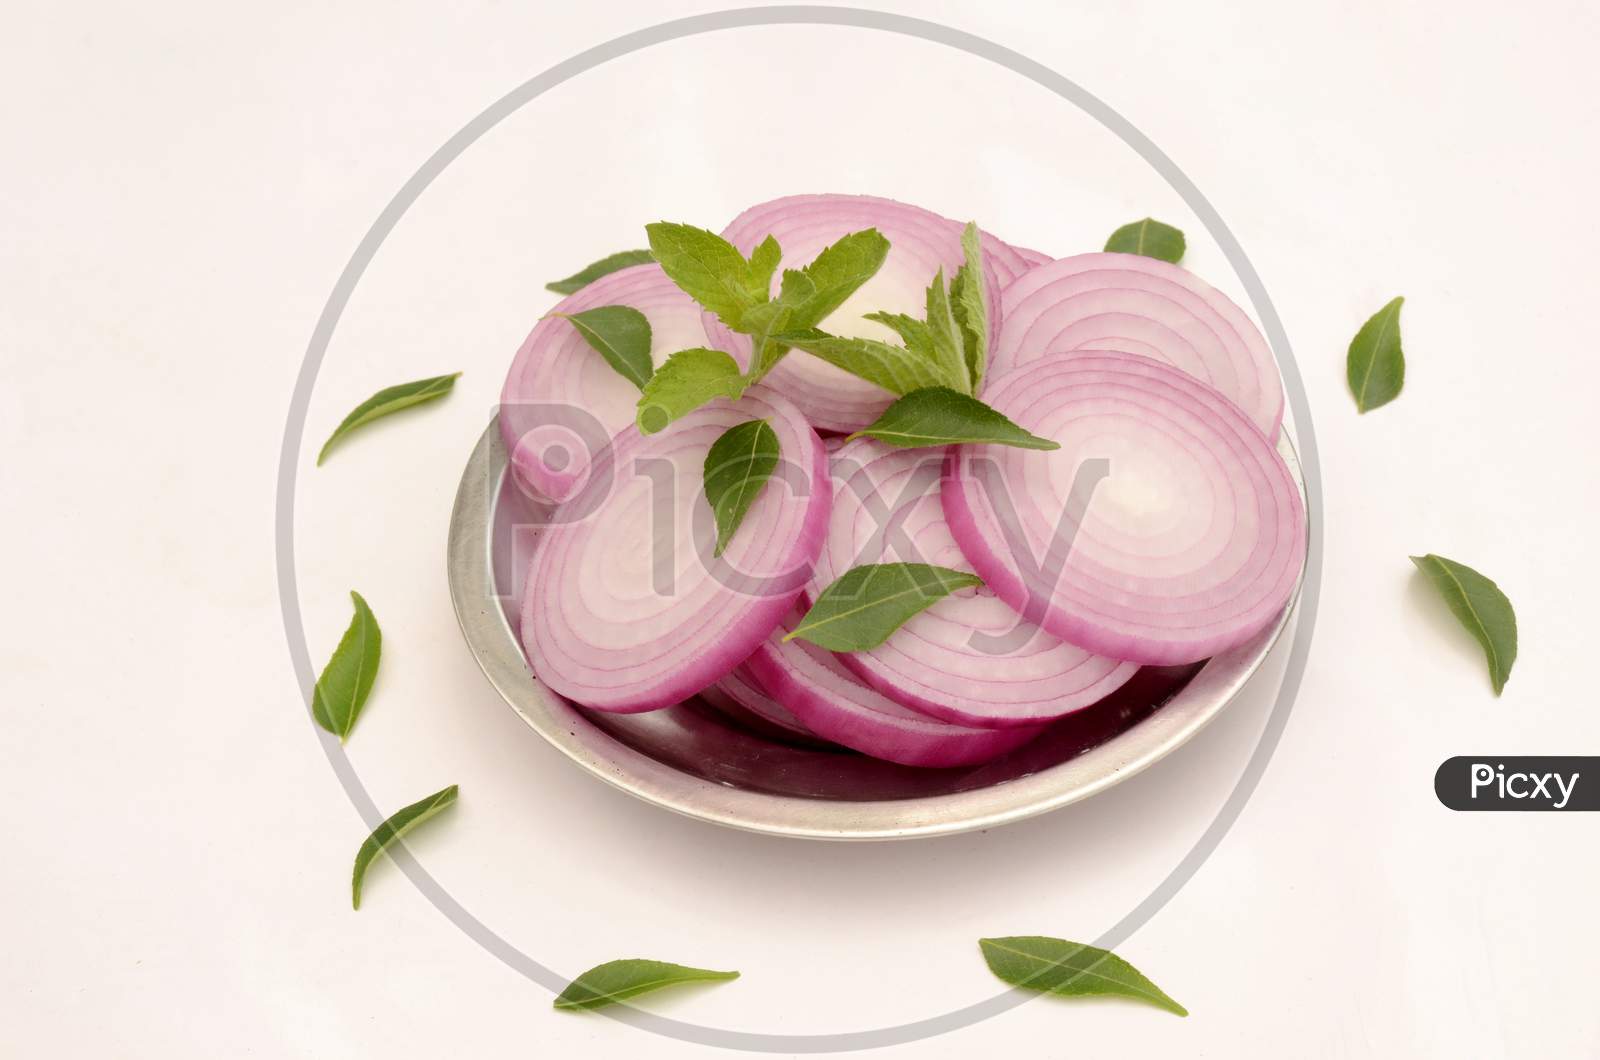 Closeup Sliced Onion In The Plate Isolated On White Background.